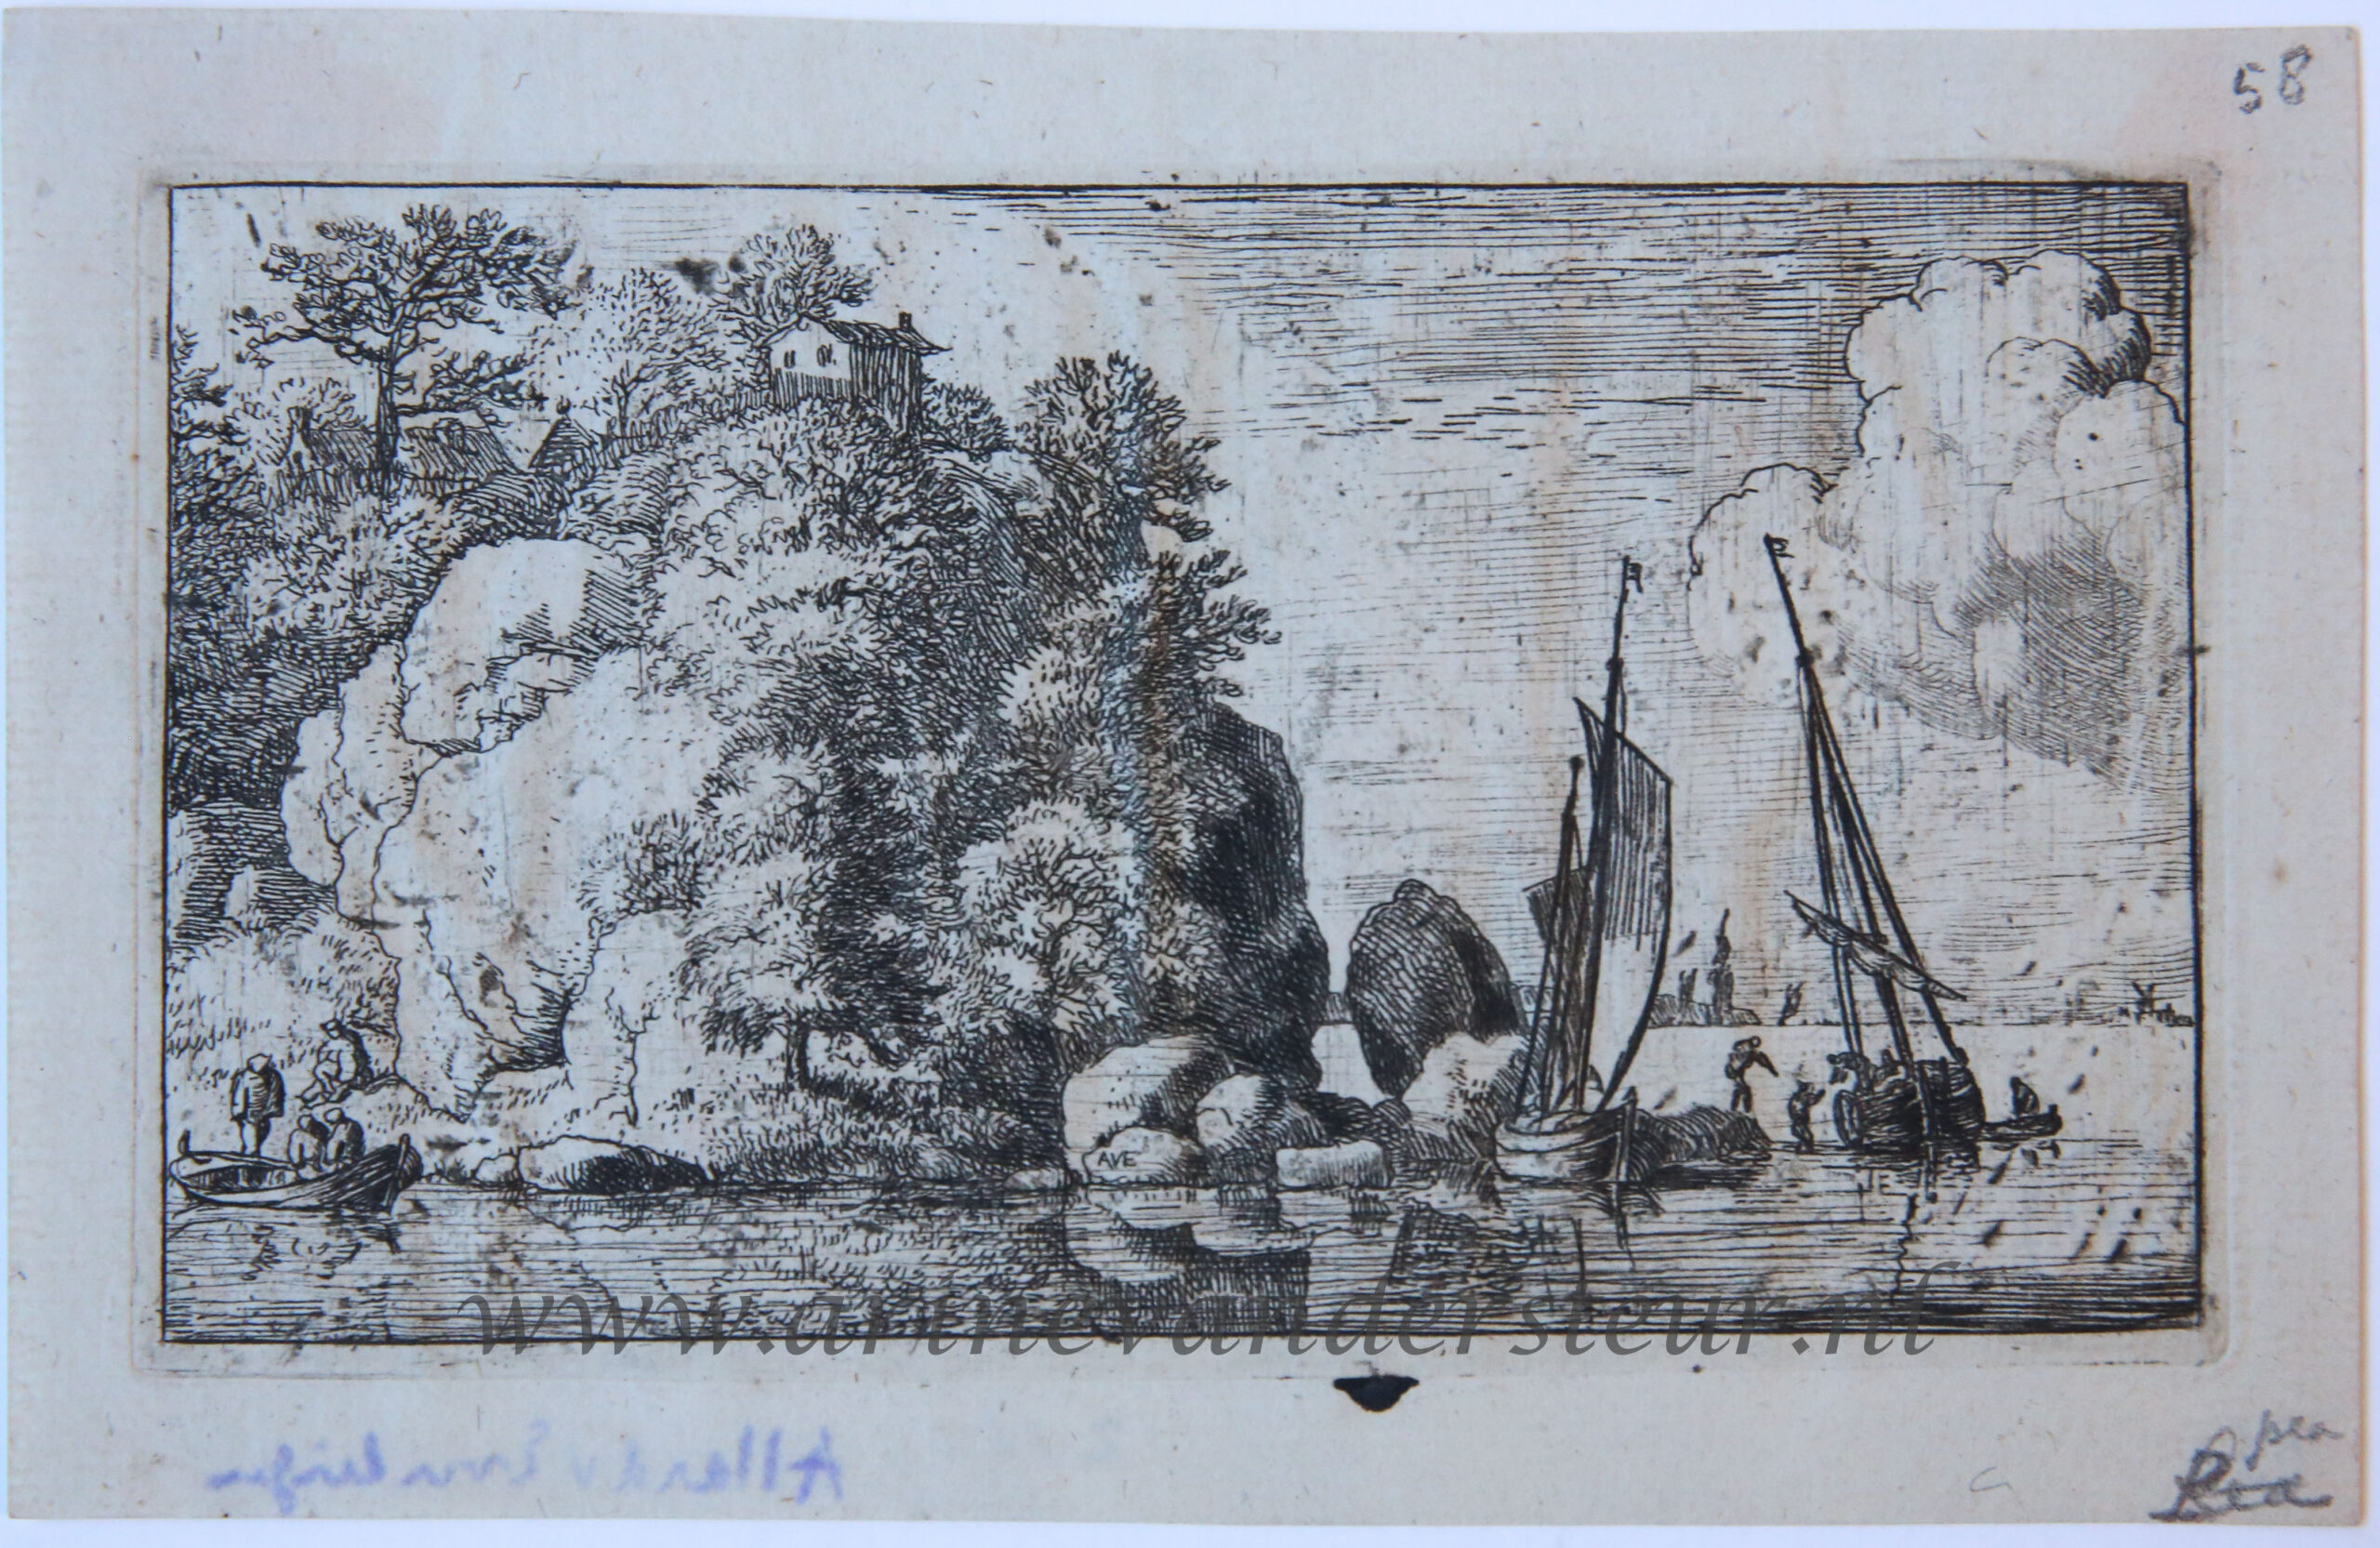 [Antique print, etching] The two boats on the river/Twee boten op een rivier, published between 1631-1675 .